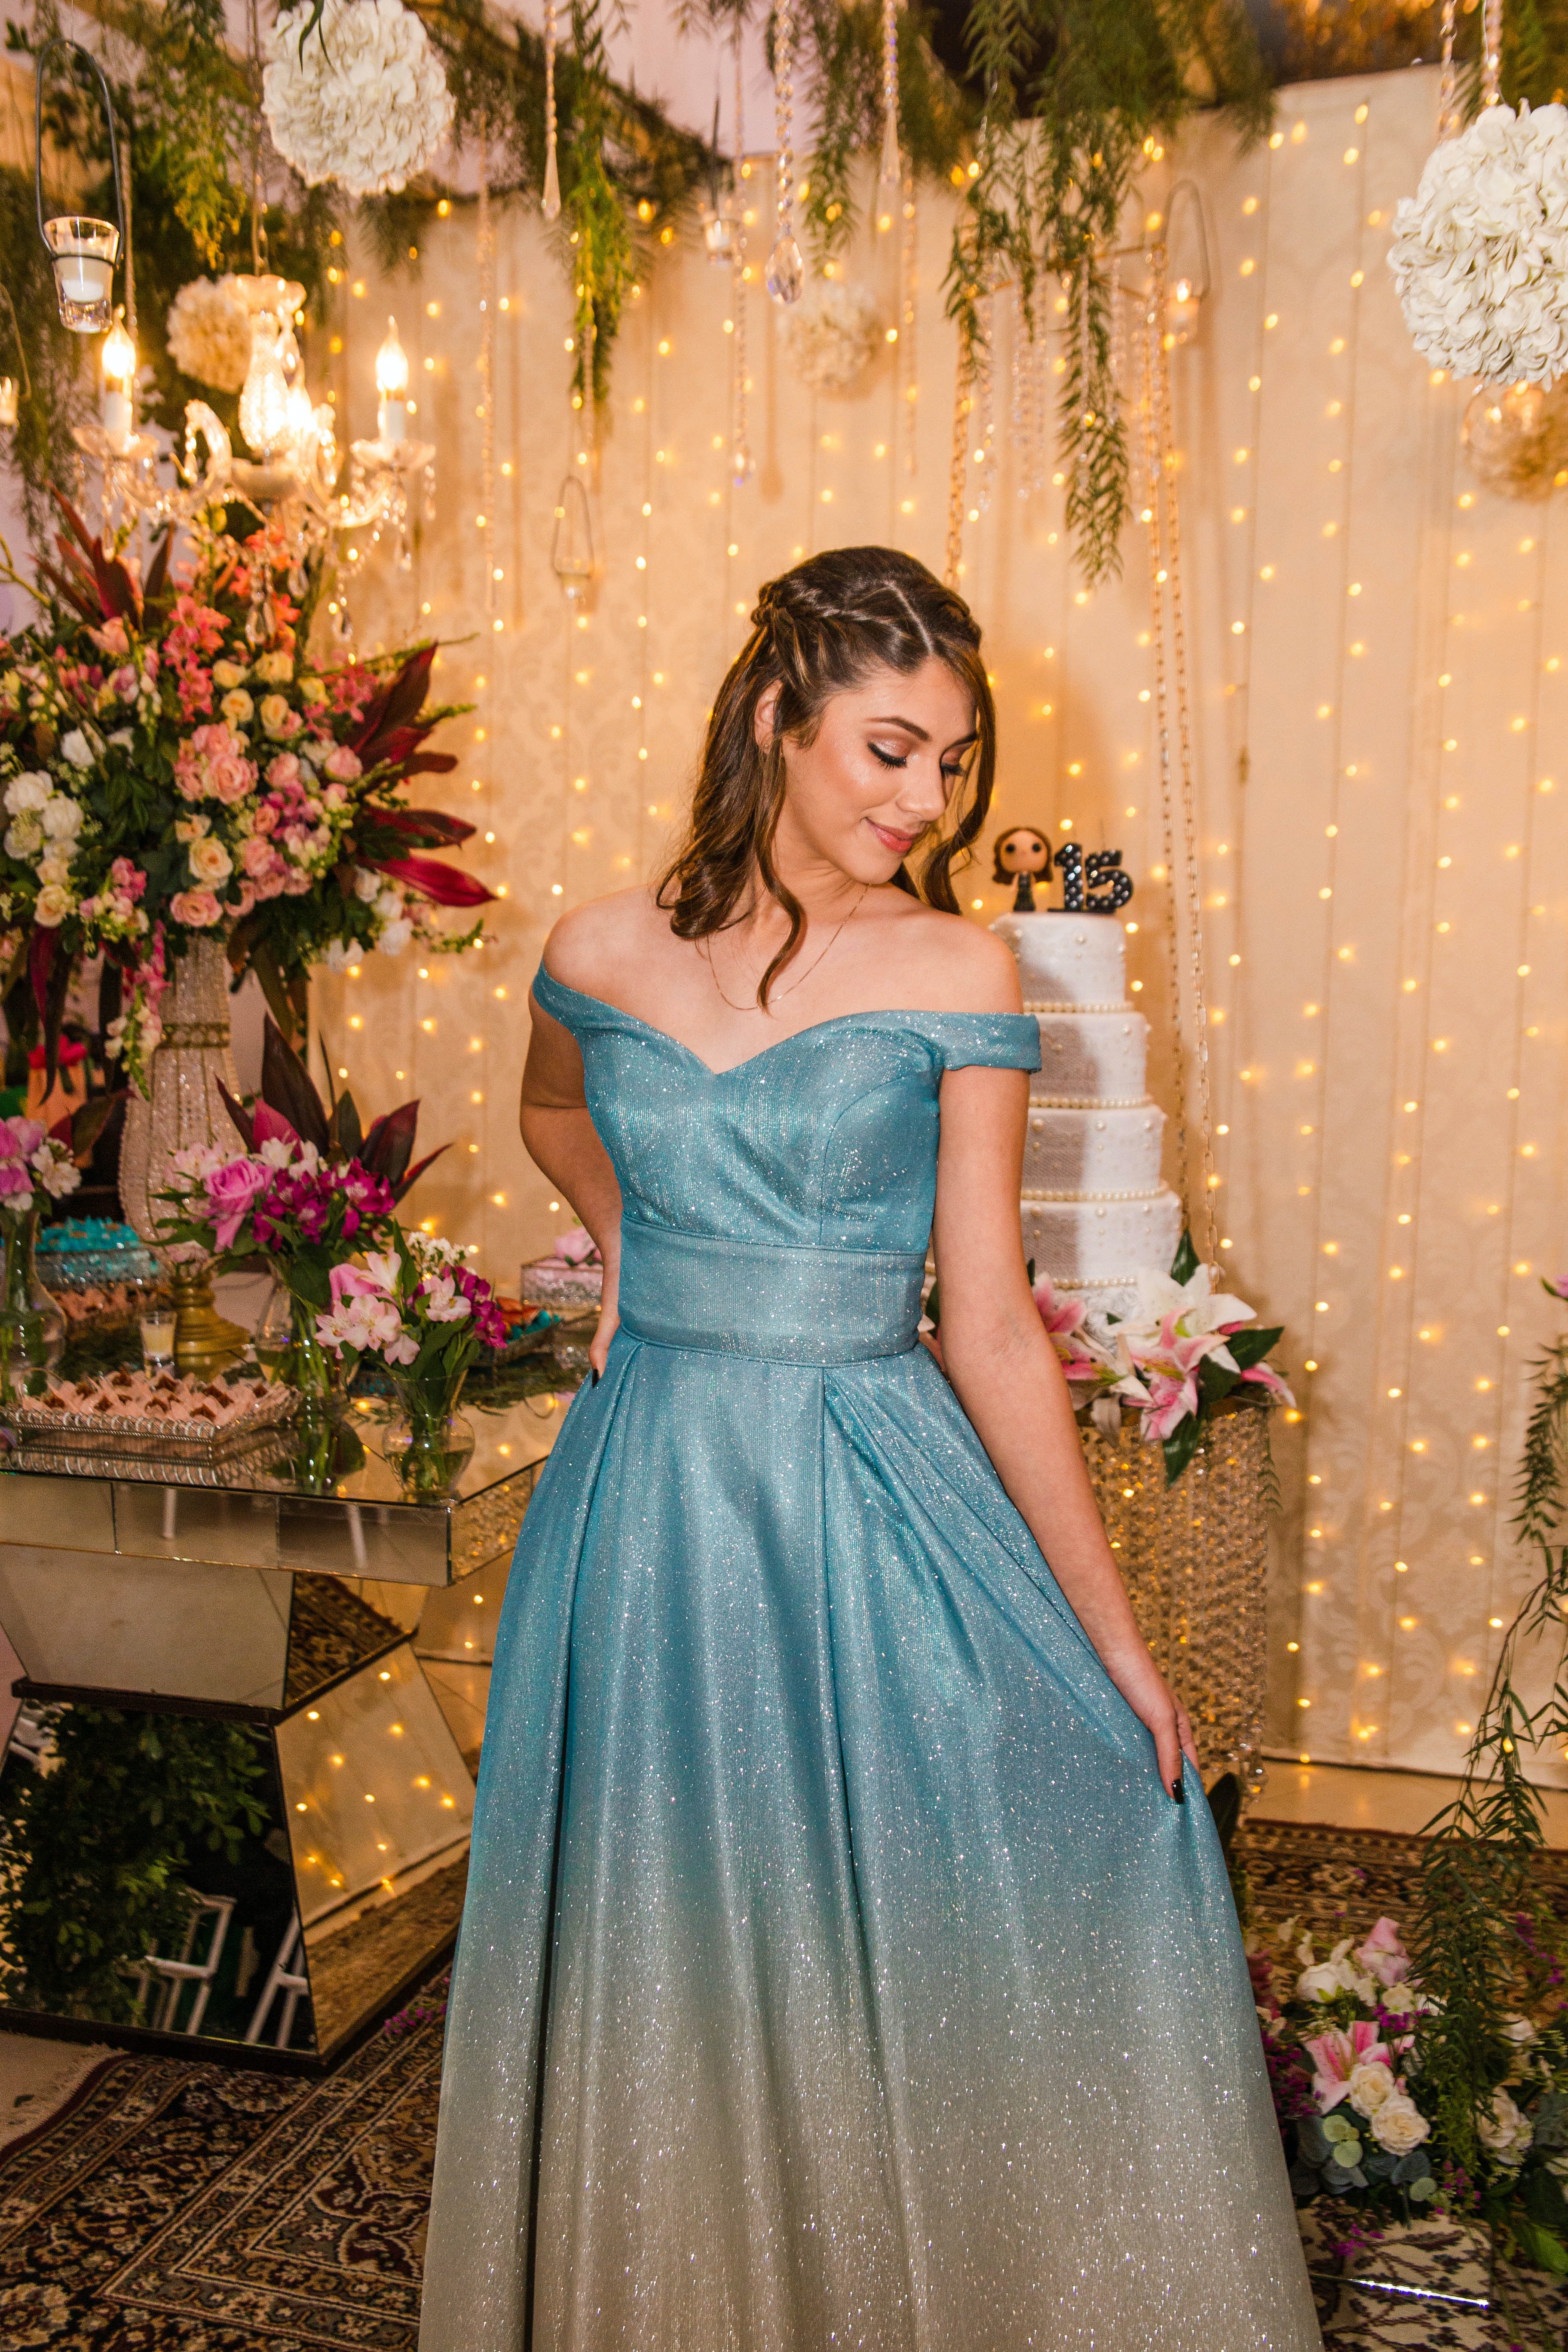 Elizabeth wore a blue gown to her 16th birthday party. | Photo: Pexels